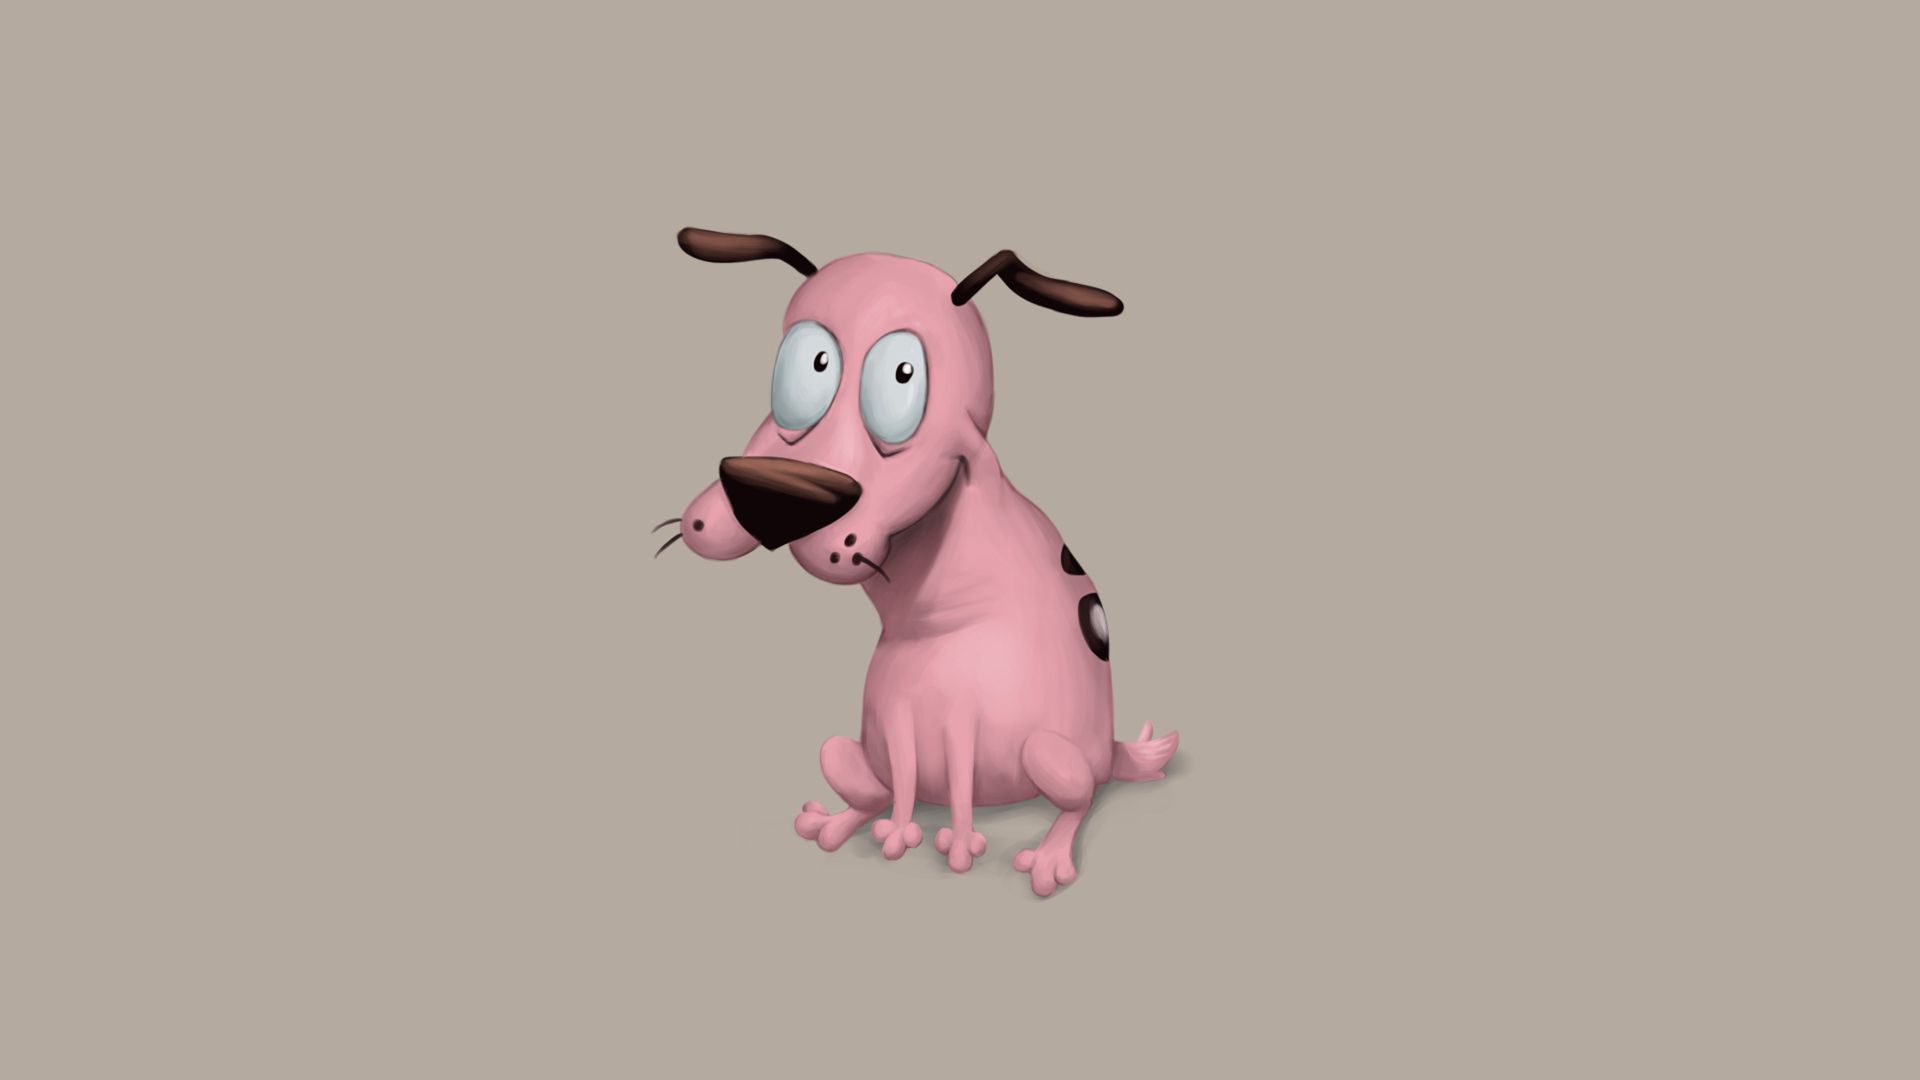 110206 download wallpaper minimalism, vector, dog, courage is a cowardly dog, courage - cowardly dog, courage - the cowardly dog screensavers and pictures for free